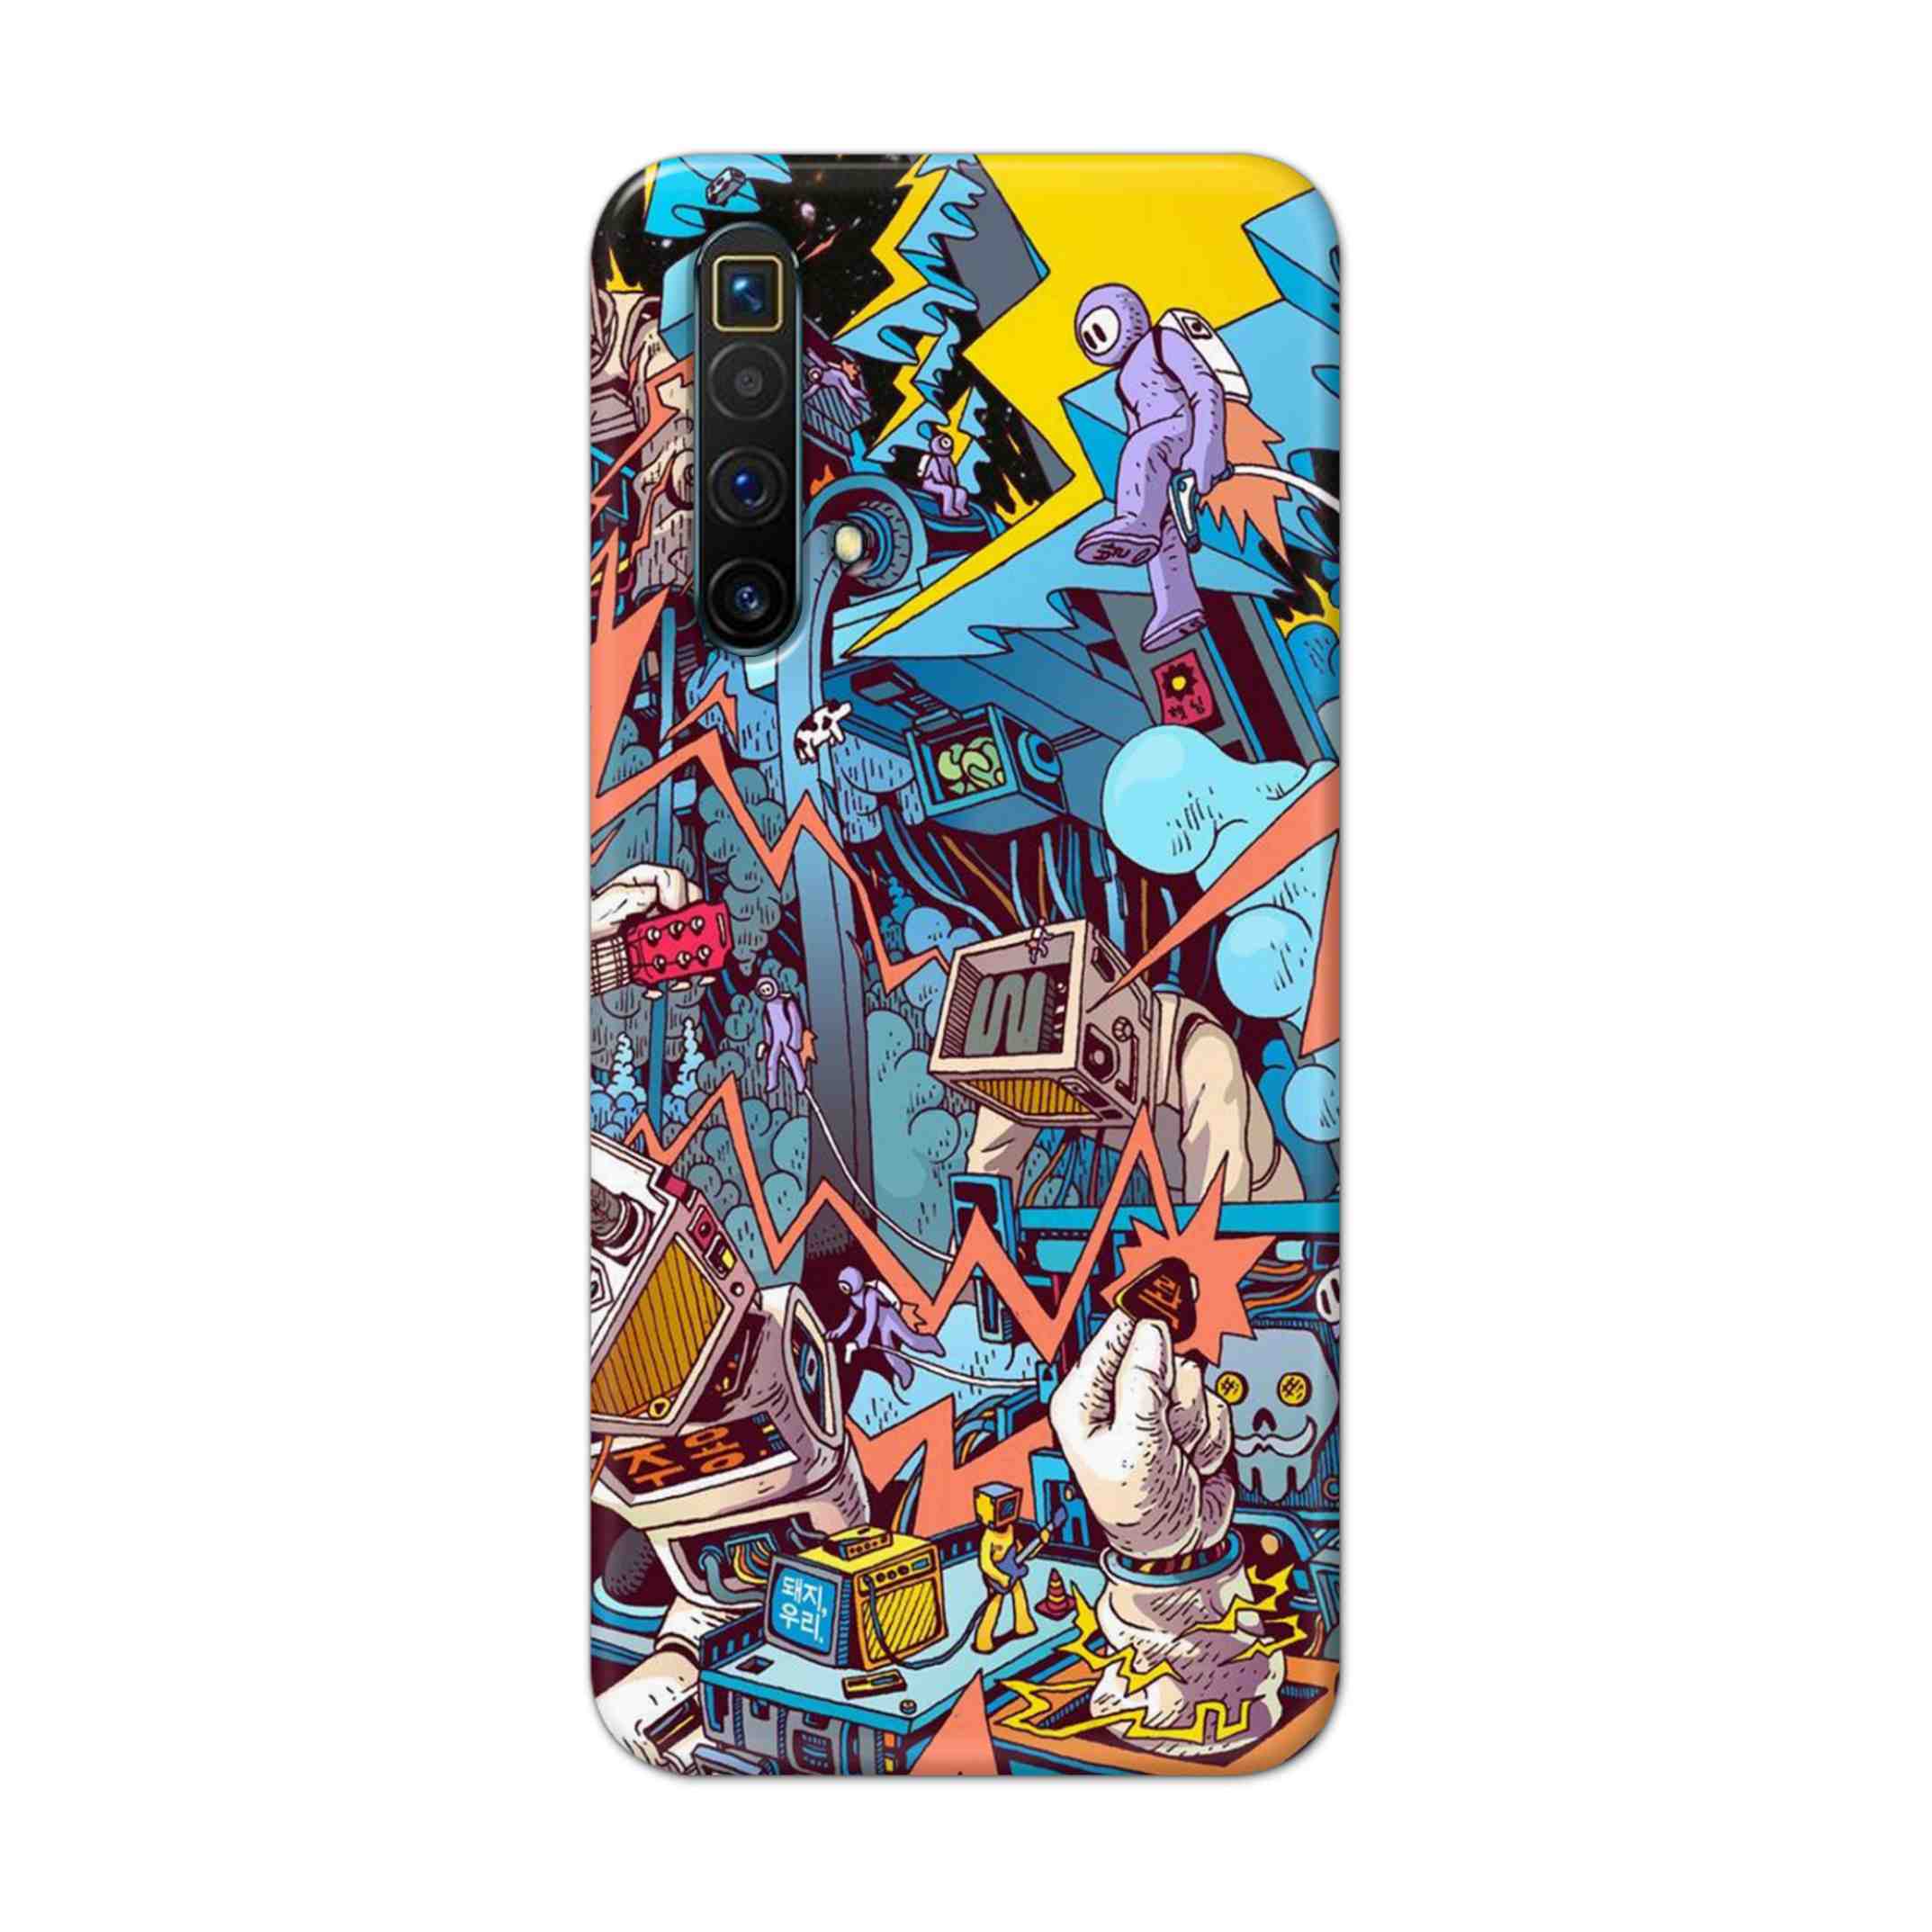 Buy Ofo Panic Hard Back Mobile Phone Case Cover For Oppo Realme X3 Online